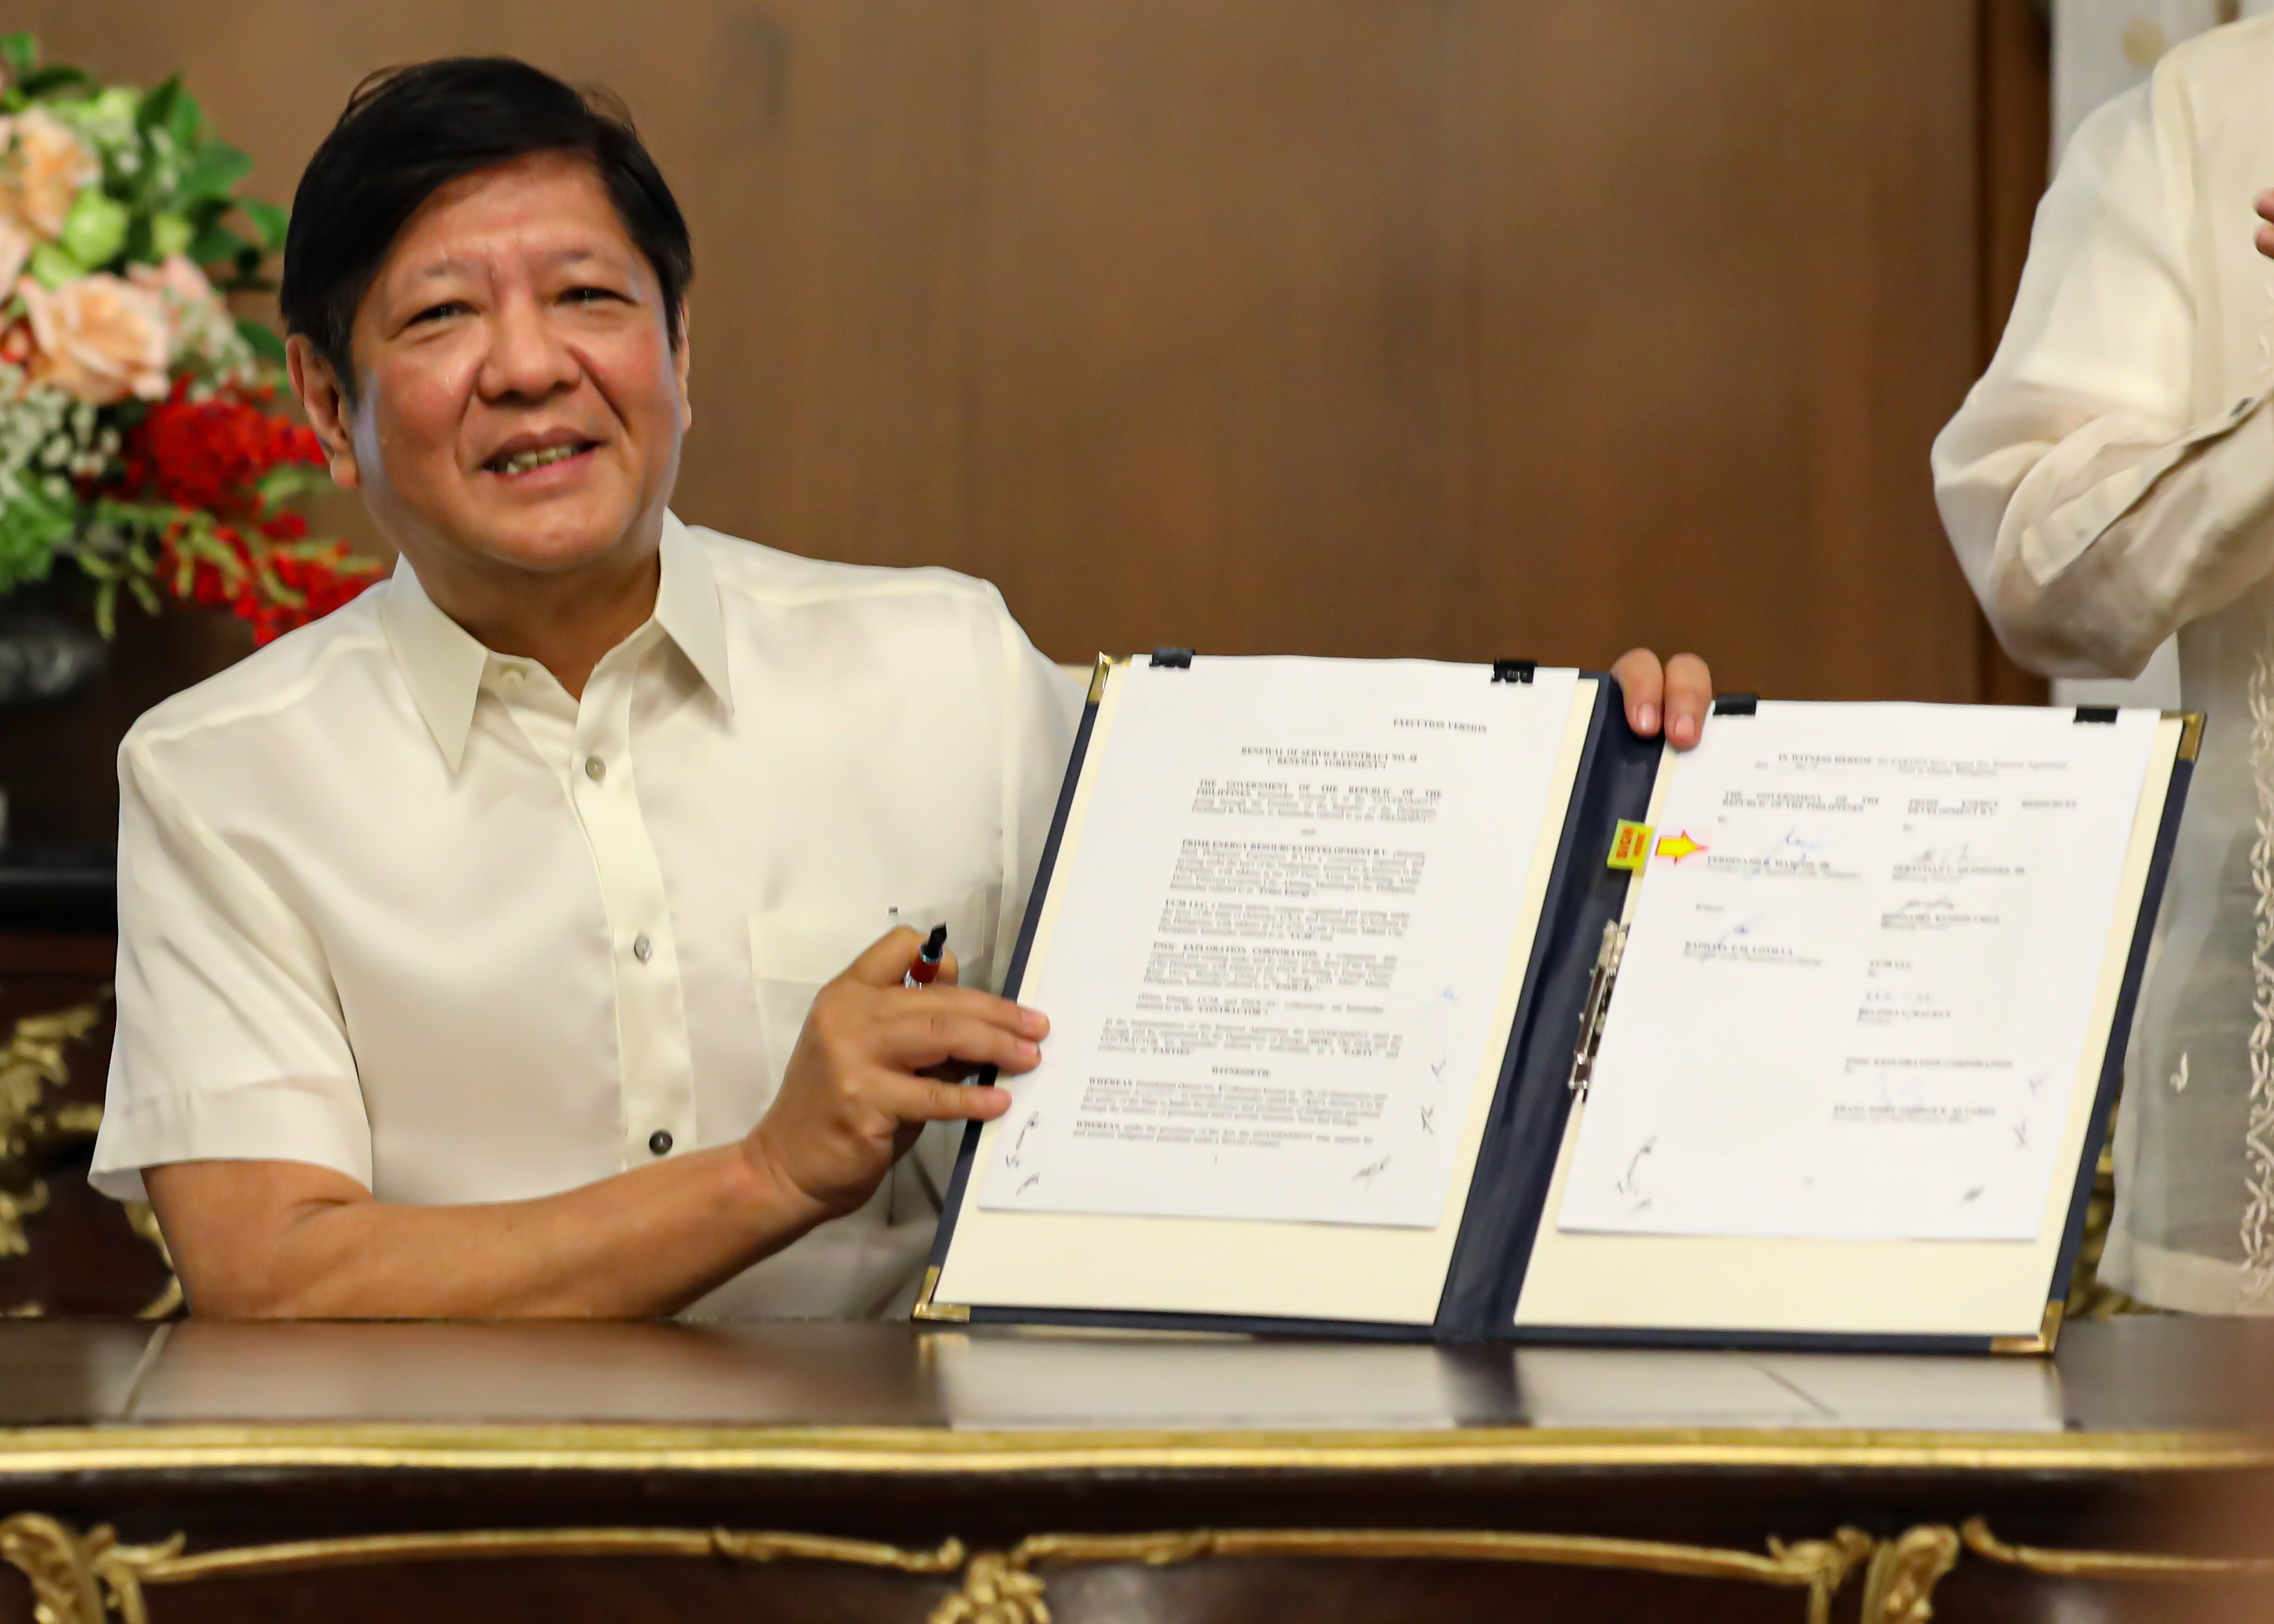 President Marcos signs the renewal agreement for the Malampaya Service Contract No. 38